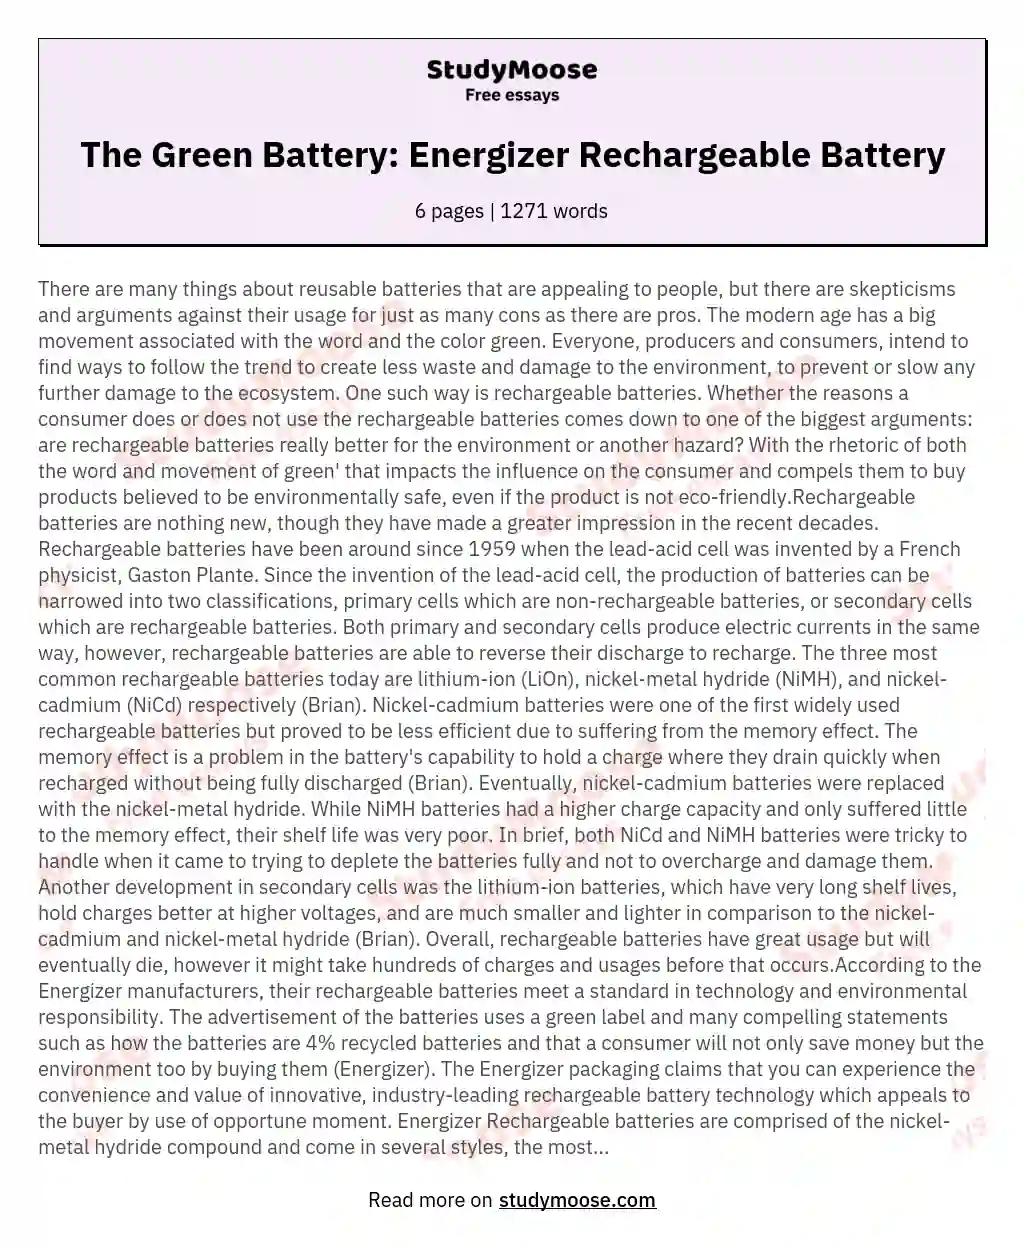 The Green Battery: Energizer Rechargeable Battery essay